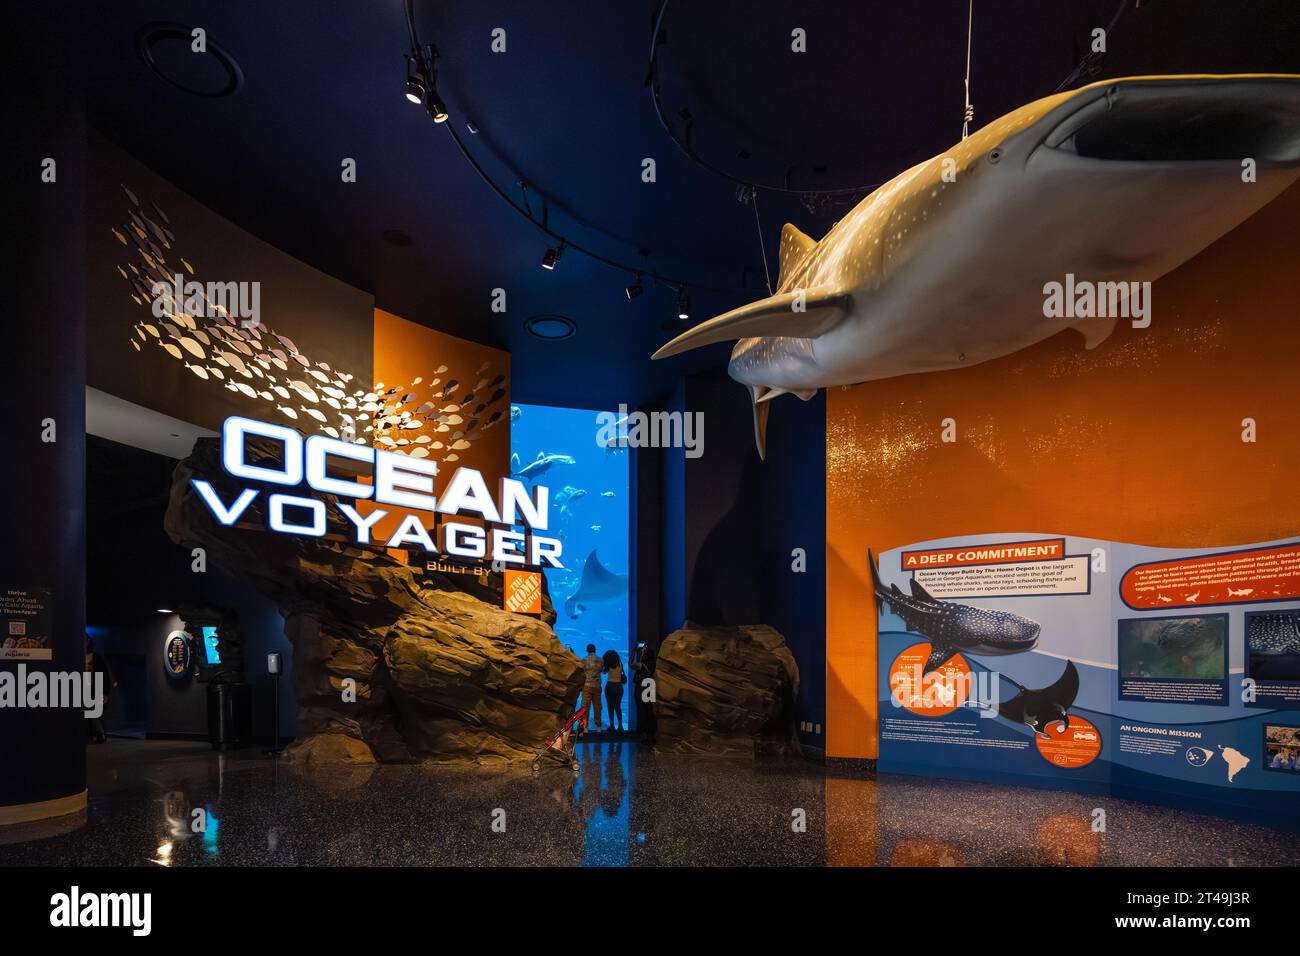 Ocean Voyager exhibit at the Georgia Aquarium provides an up-close view of whale sharks, giant manta rays, and a host of marine life in Atlanta, GA. Stock Photo